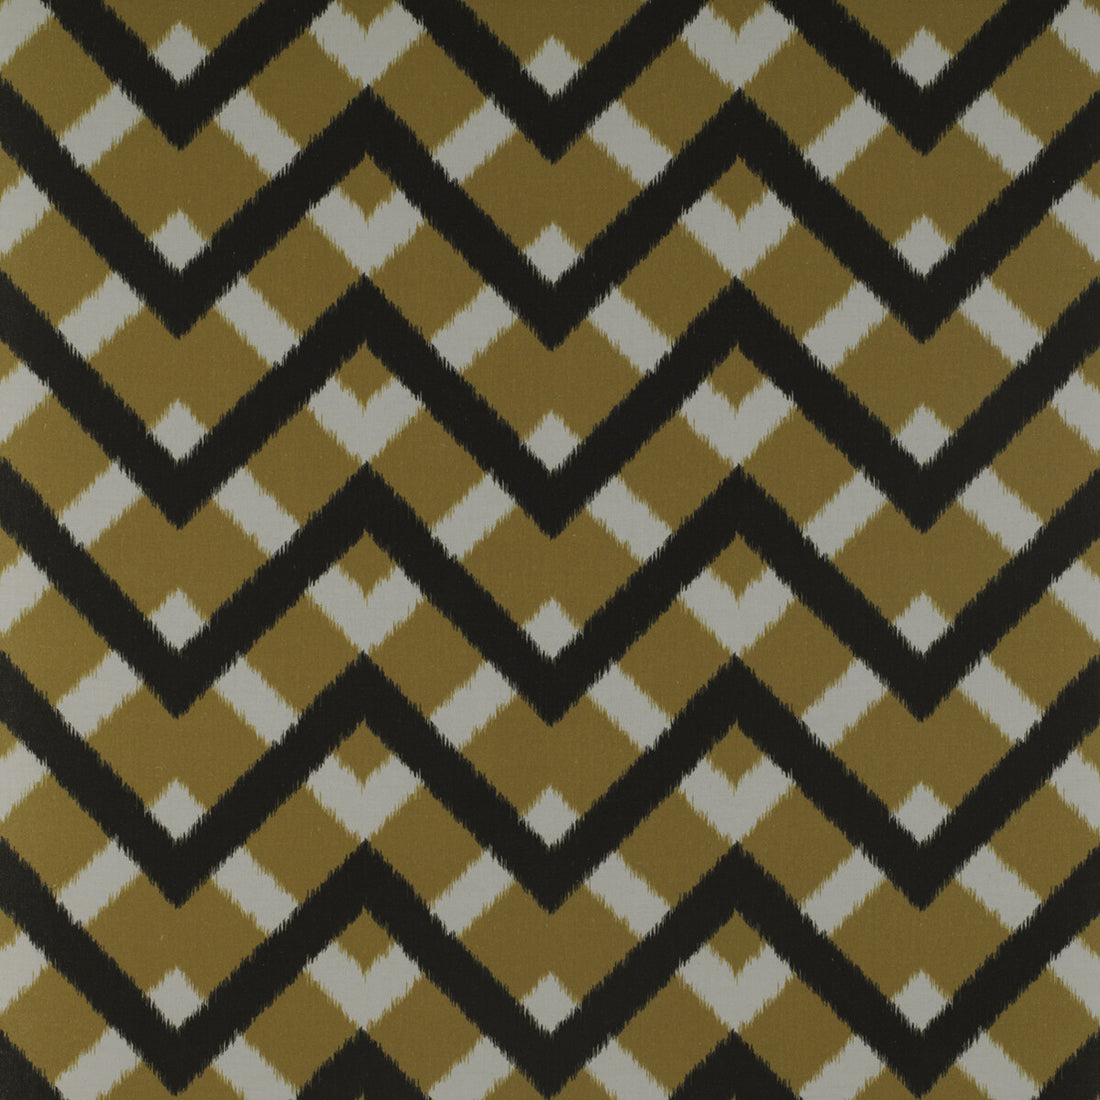 Monti fabric in ocre color - pattern GDT5338.004.0 - by Gaston y Daniela in the Tierras collection